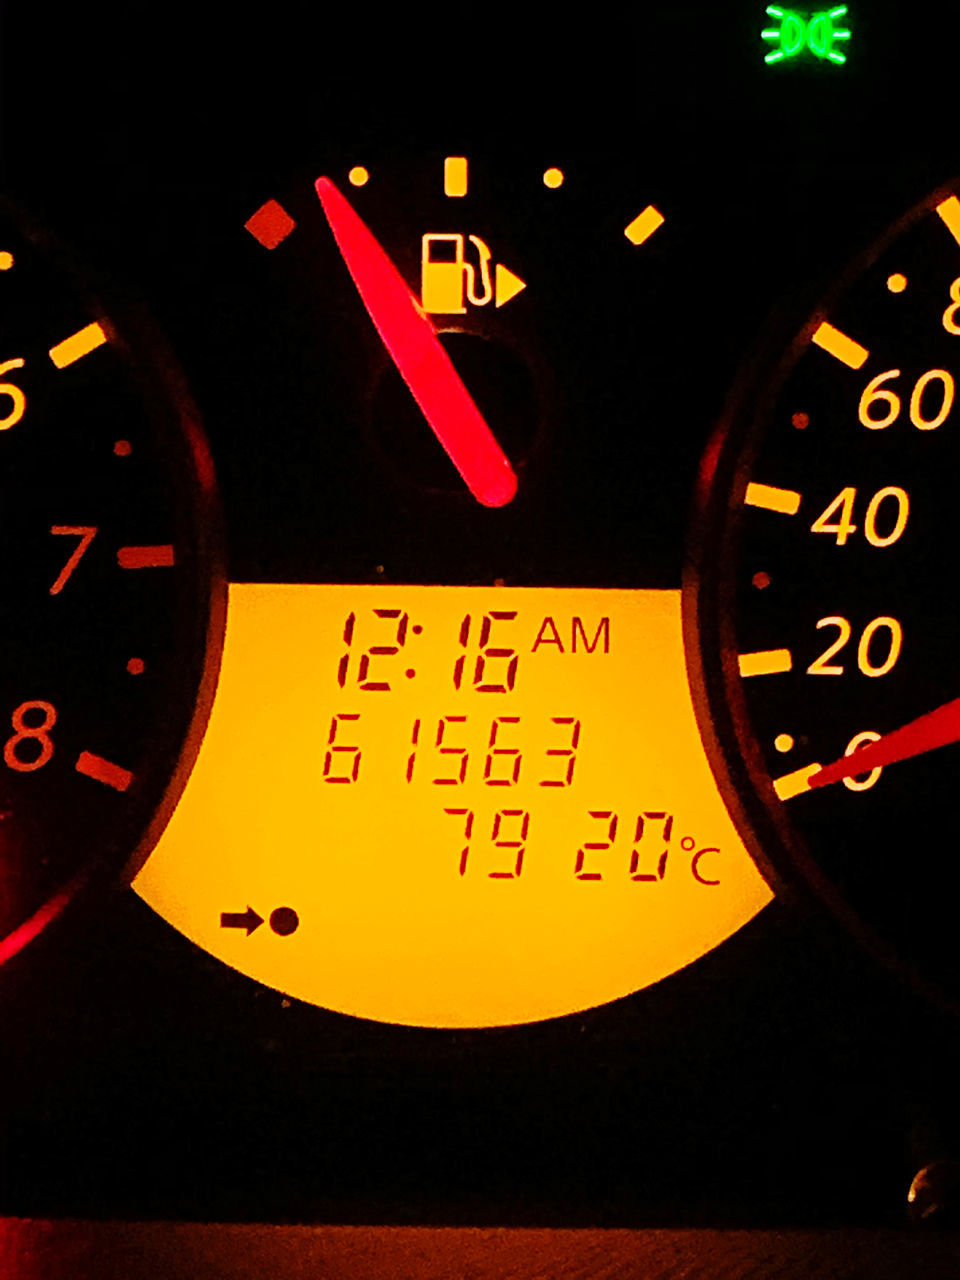 number, no people, speedometer, close-up, communication, transportation, vehicle interior, control panel, accuracy, text, dashboard, mode of transportation, time, illuminated, indoors, motor vehicle, technology, car, car interior, western script, clock, meter - instrument of measurement